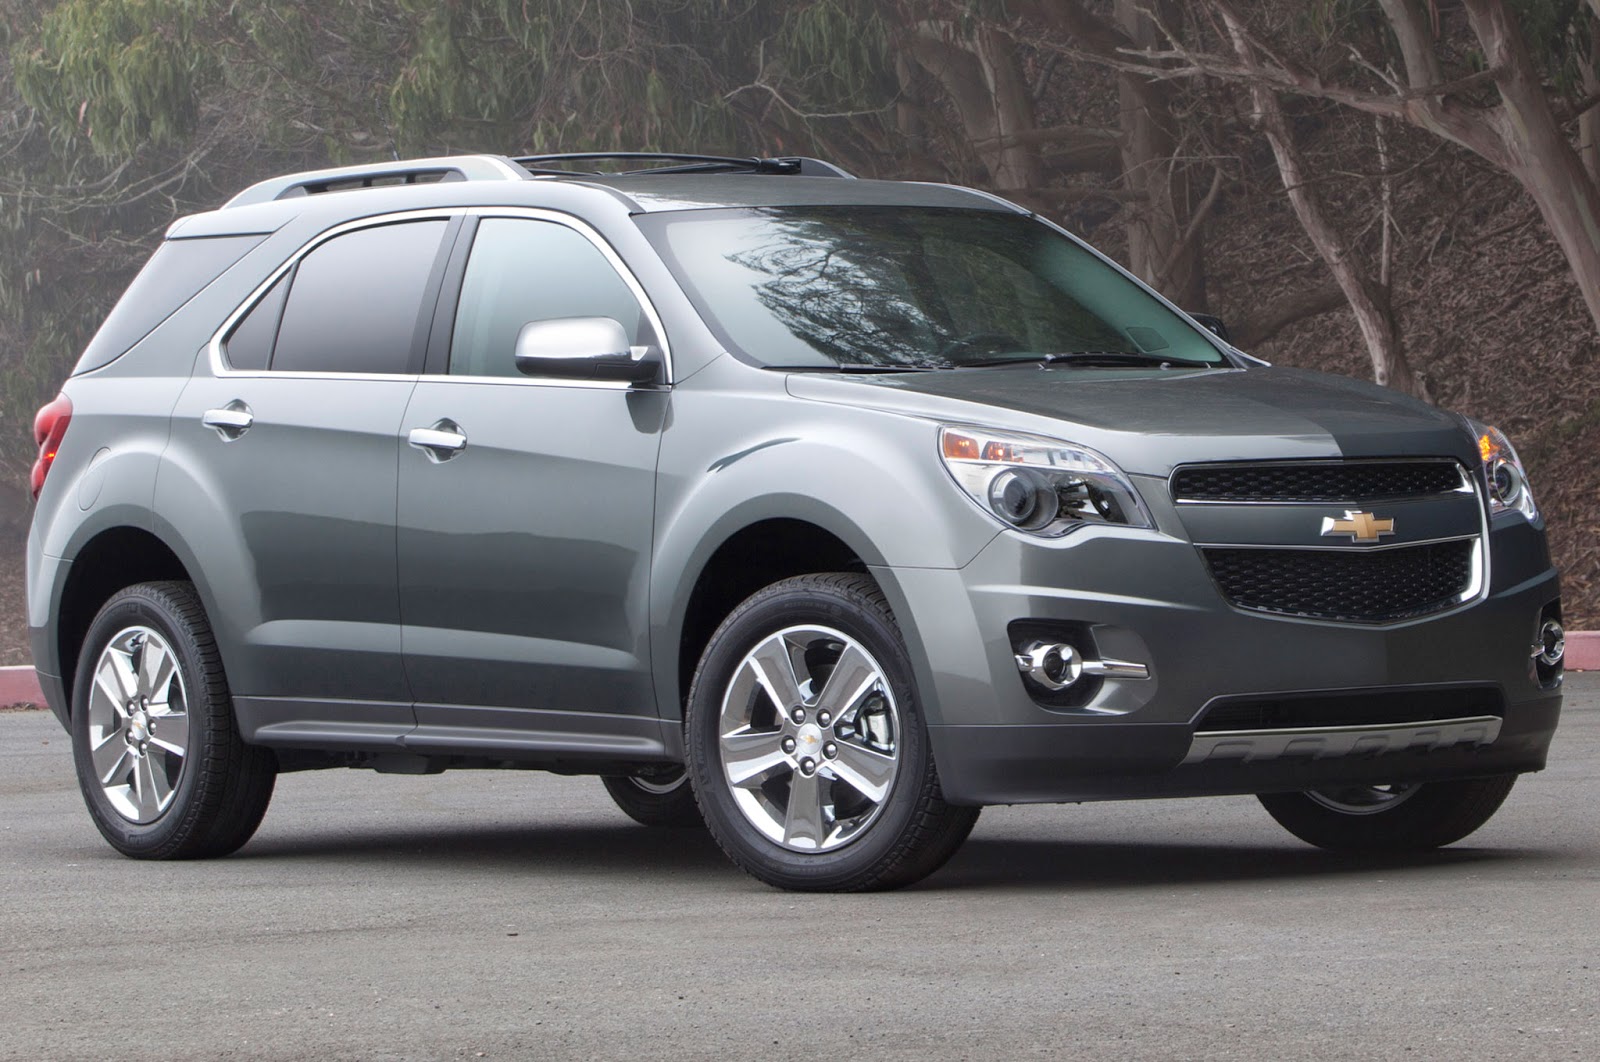 2015 Chevy Equinox Vin Number